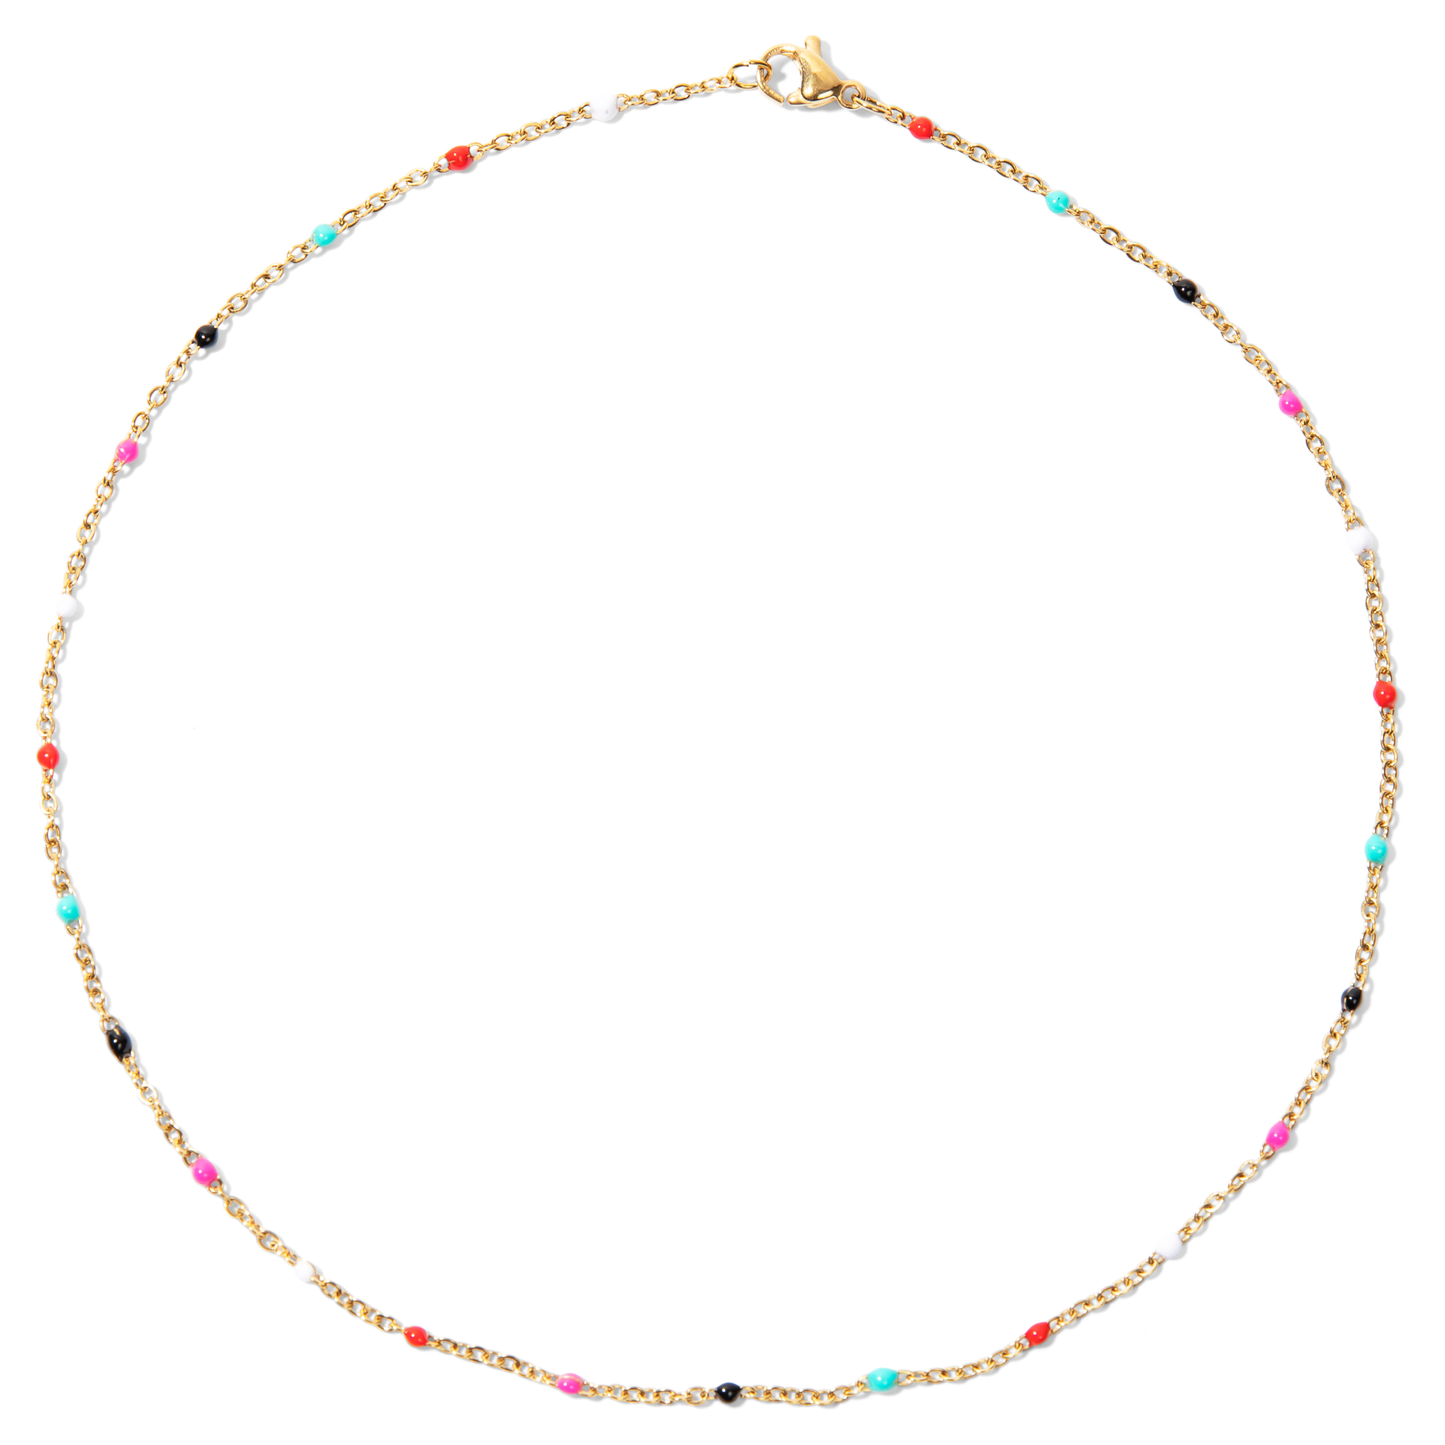 Ellie Vail - Gwen Colorful Dainty Resin Beaded Necklace